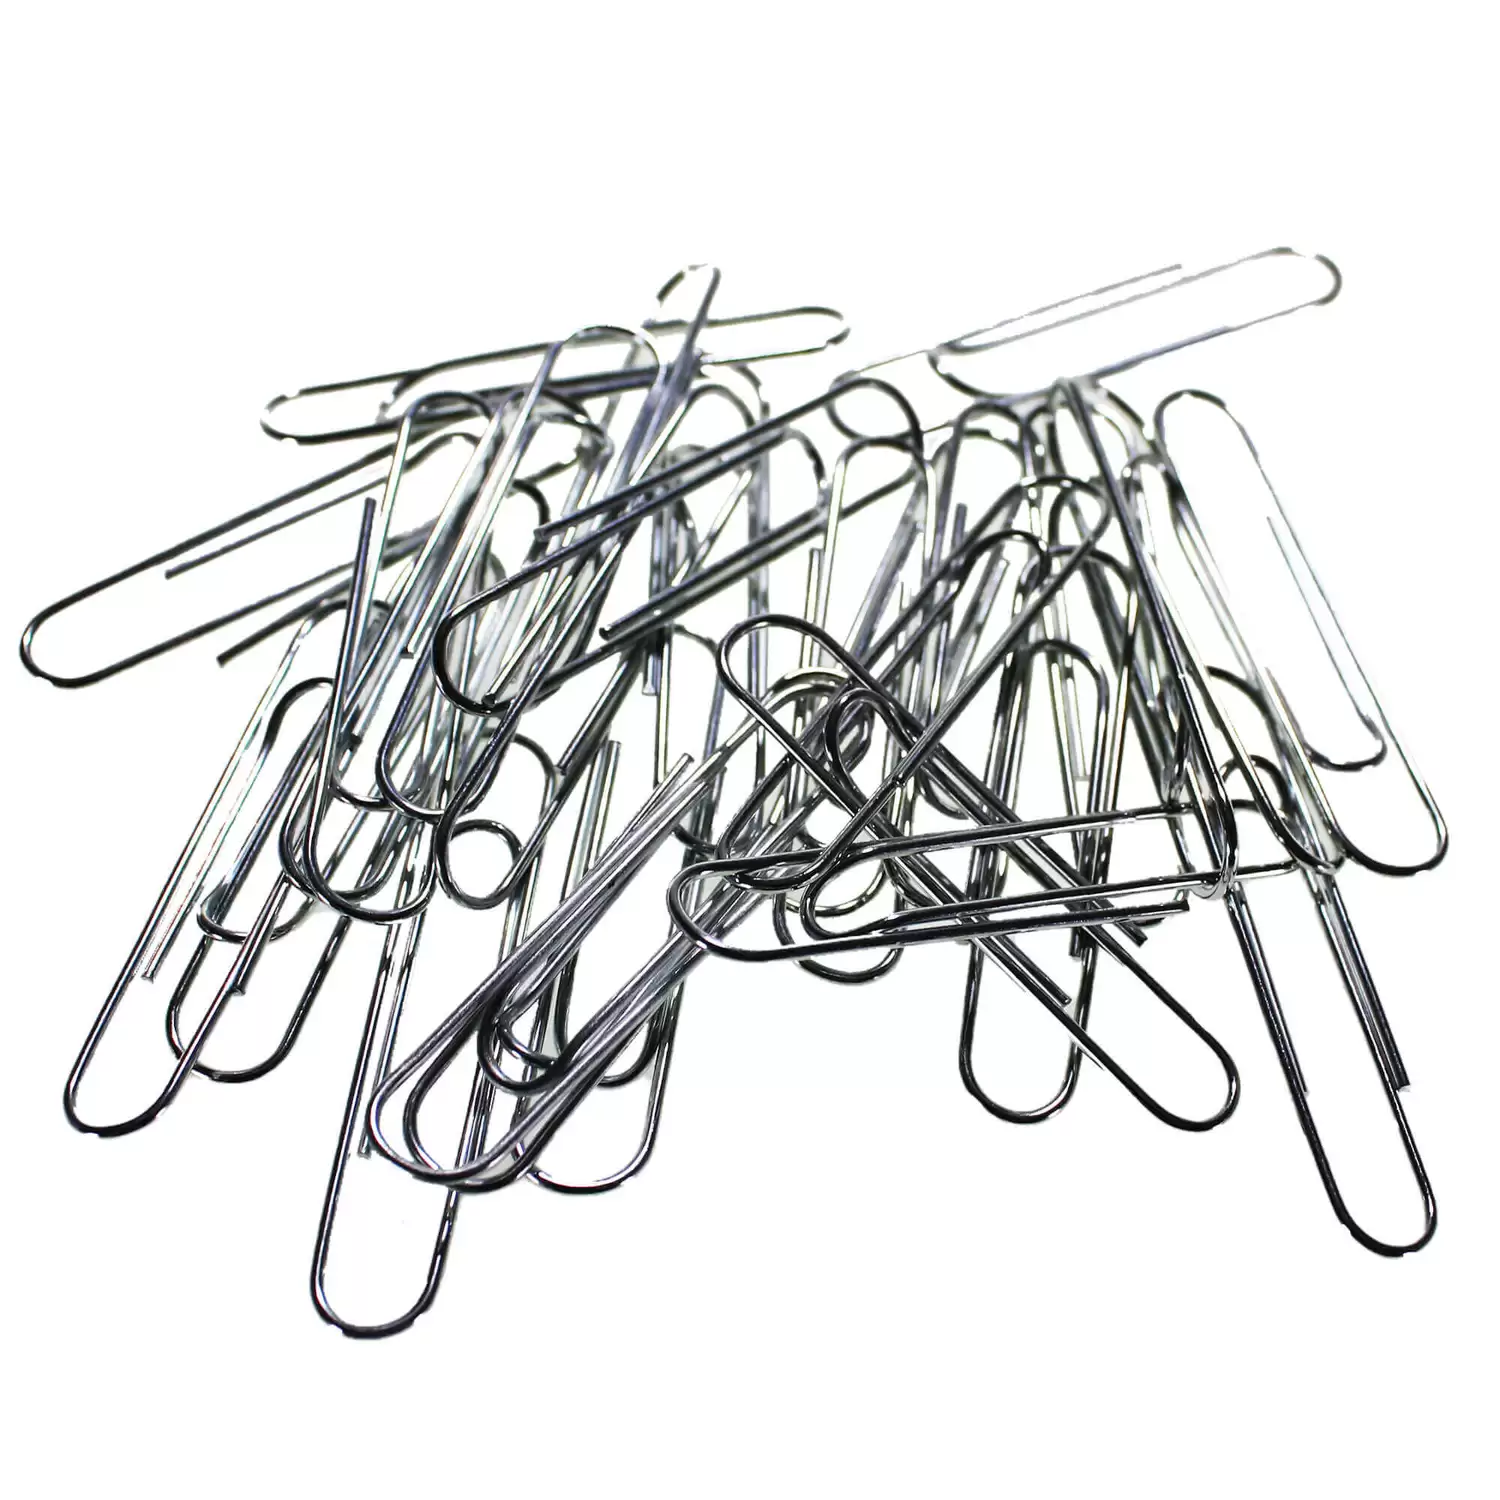 Paper Clips 33mm 1000 Pack - Gompels - Care & Nursery Supply Specialists